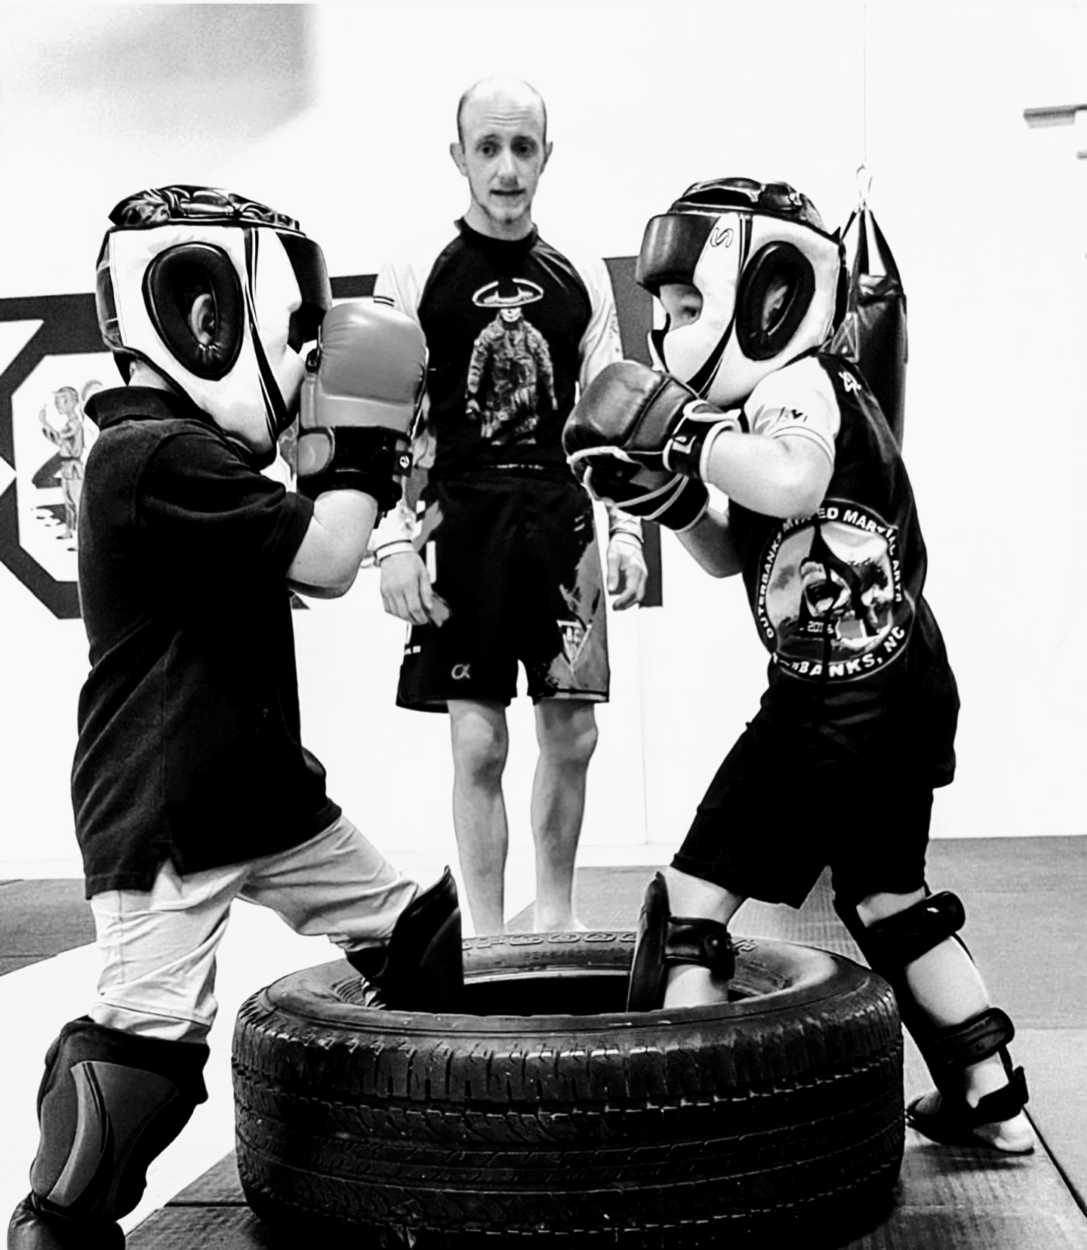 OBX Martial Arts kids boxing and self defense fitness classes 